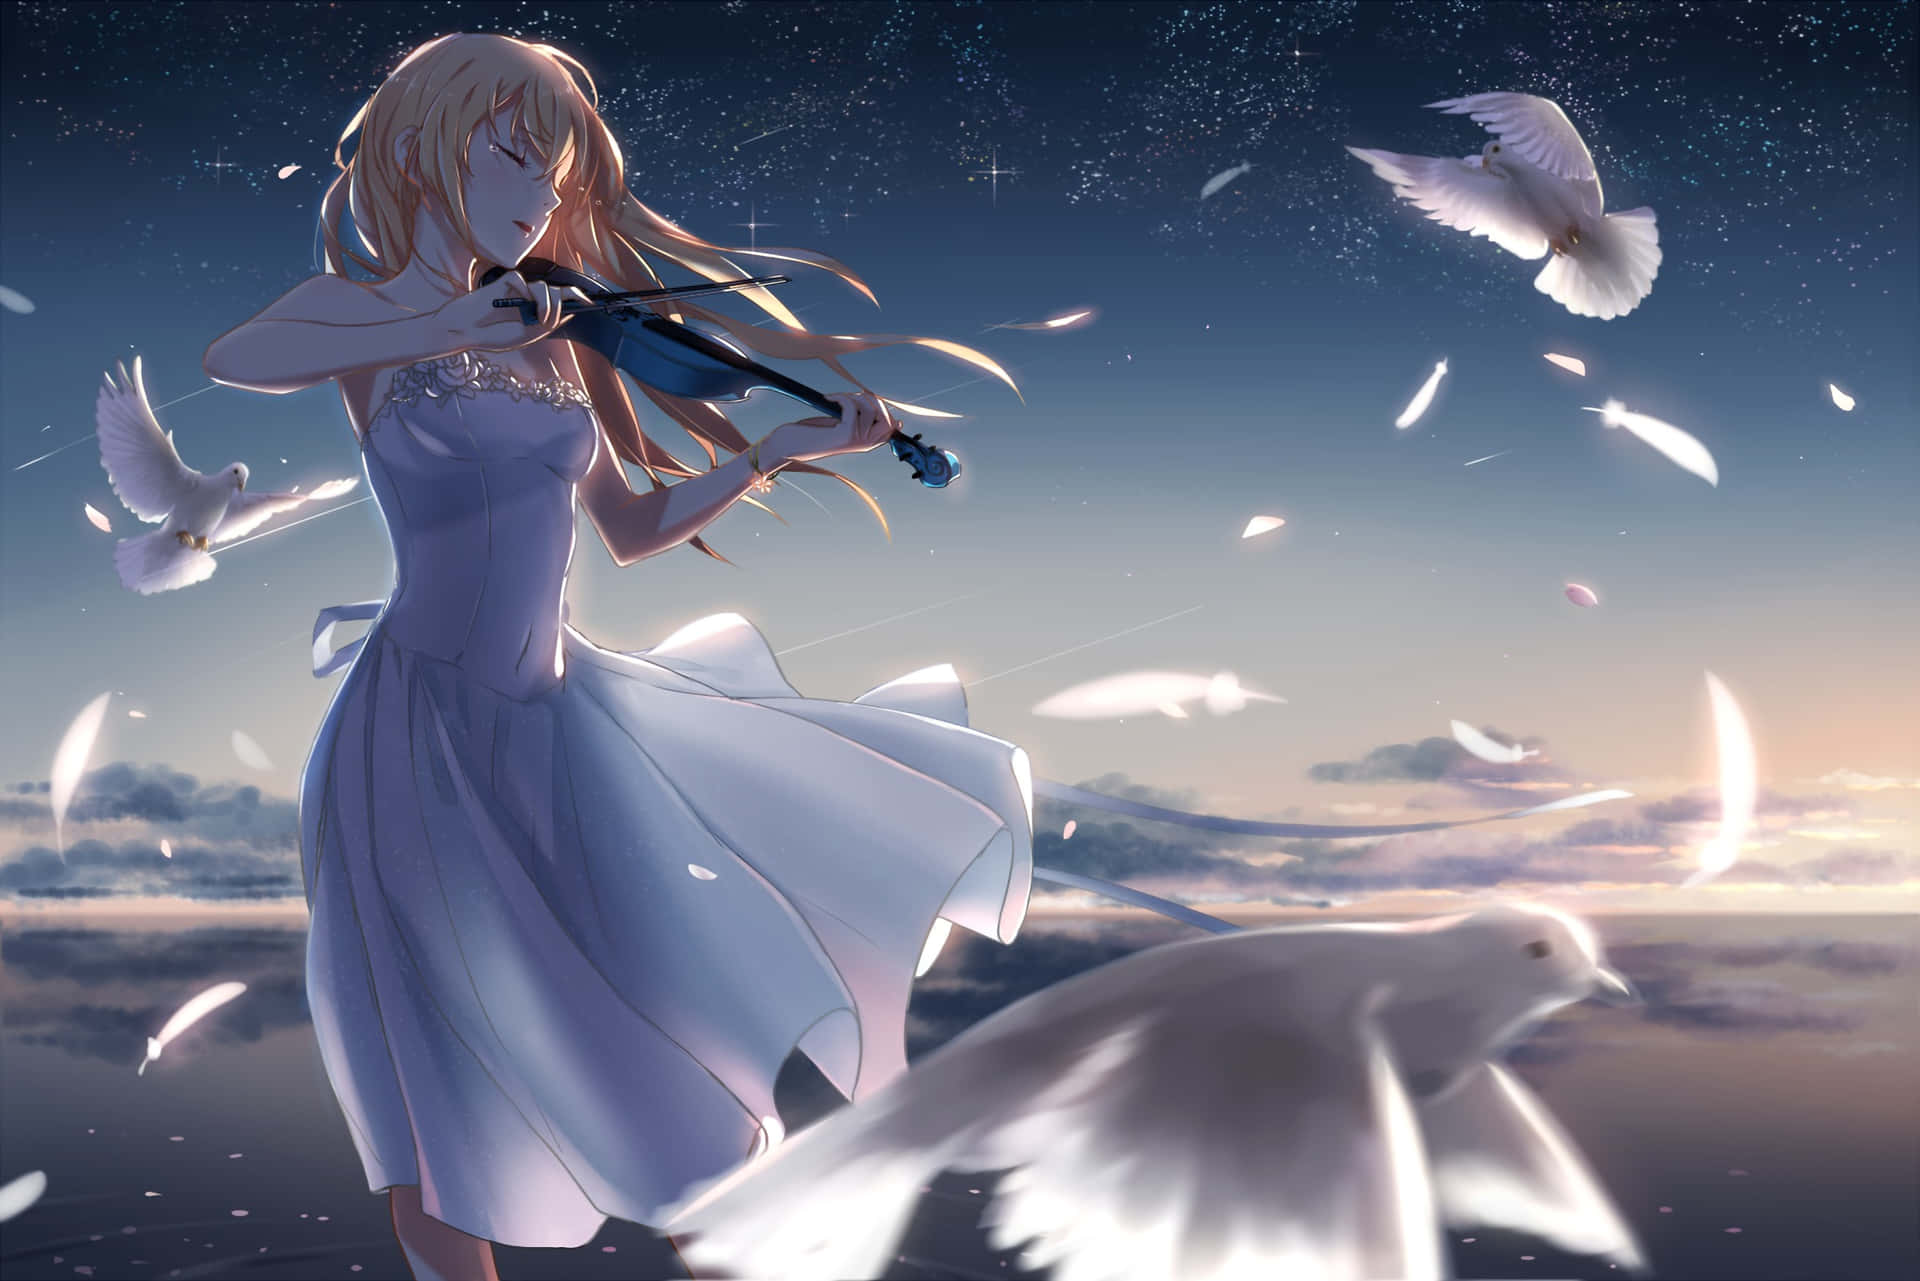 Musicians Kaori and Kosei perform together in "Your Lie in April"